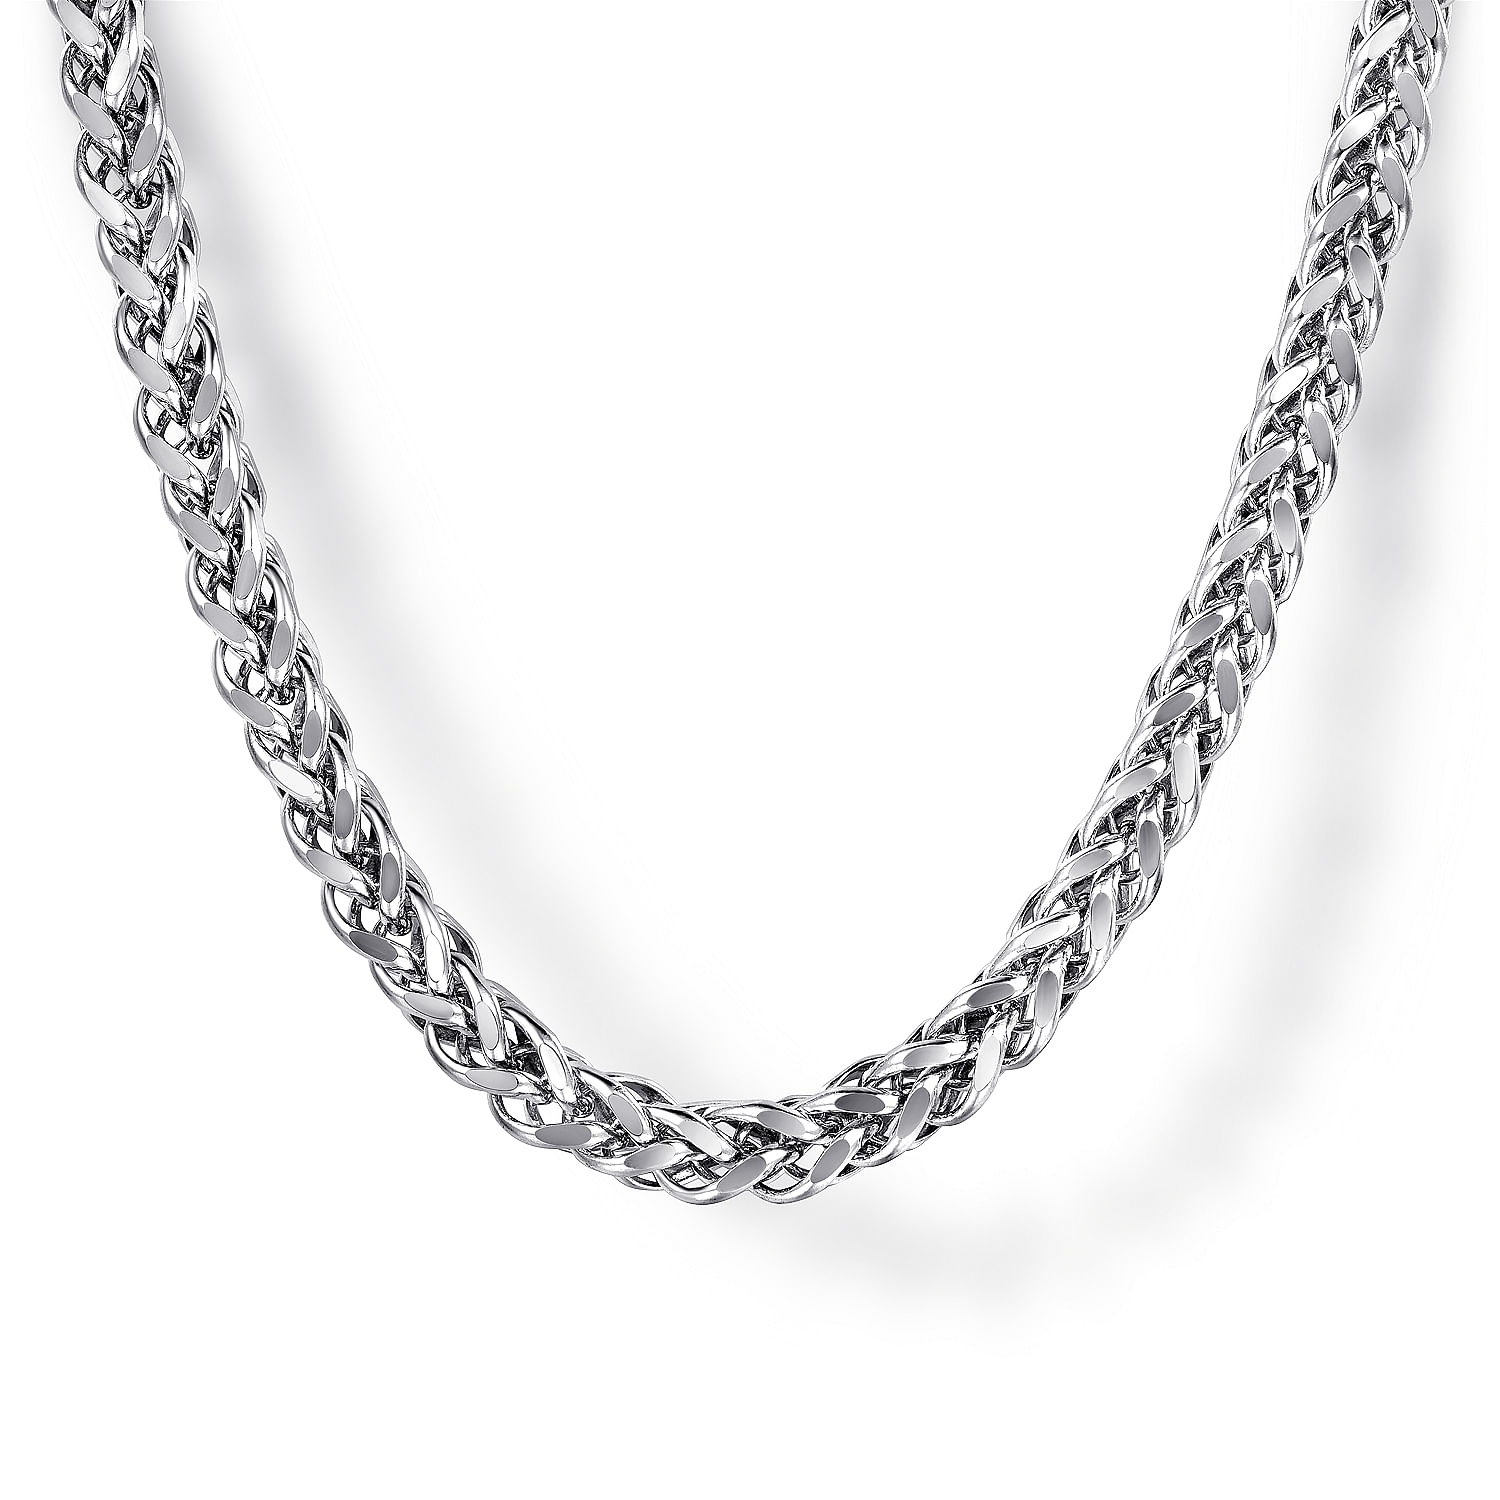 24 Inch 925 Sterling Silver Solid Men's Wheat Chain Necklace 